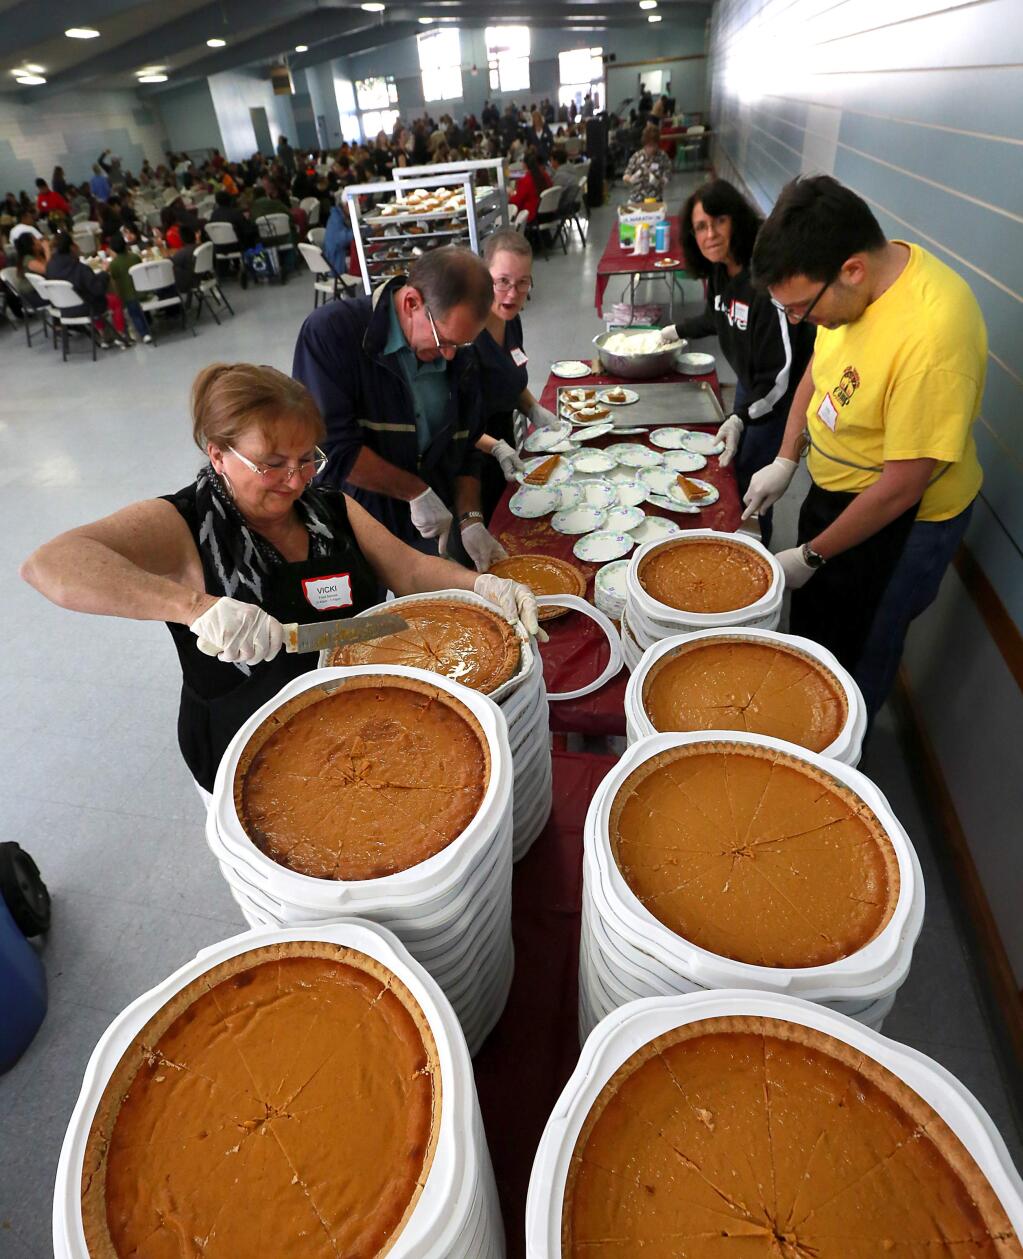 Thousands of people in need received free coats, haircuts, medical checkups and a Thanksgiving meal during the Great Thanksgiving Banquet at the Sonoma County Fairgrounds on Wednesday, November 26, 2014. (Photo by John Burgess/The Press Democrat)